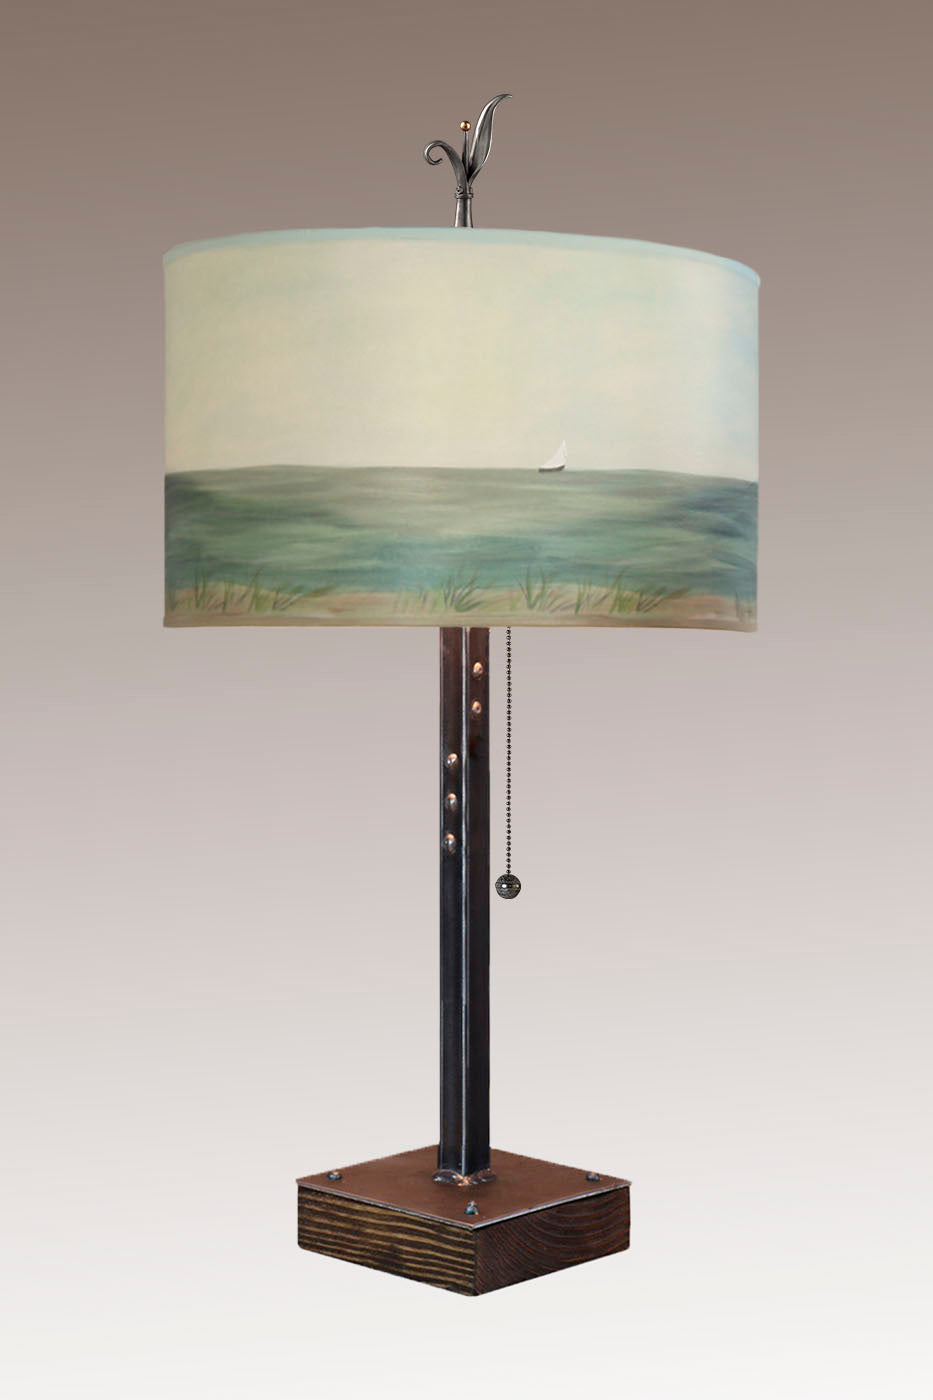 Janna Ugone & Co Table Lamps Steel Table Lamp on Wood with Large Drum Shade in Shore